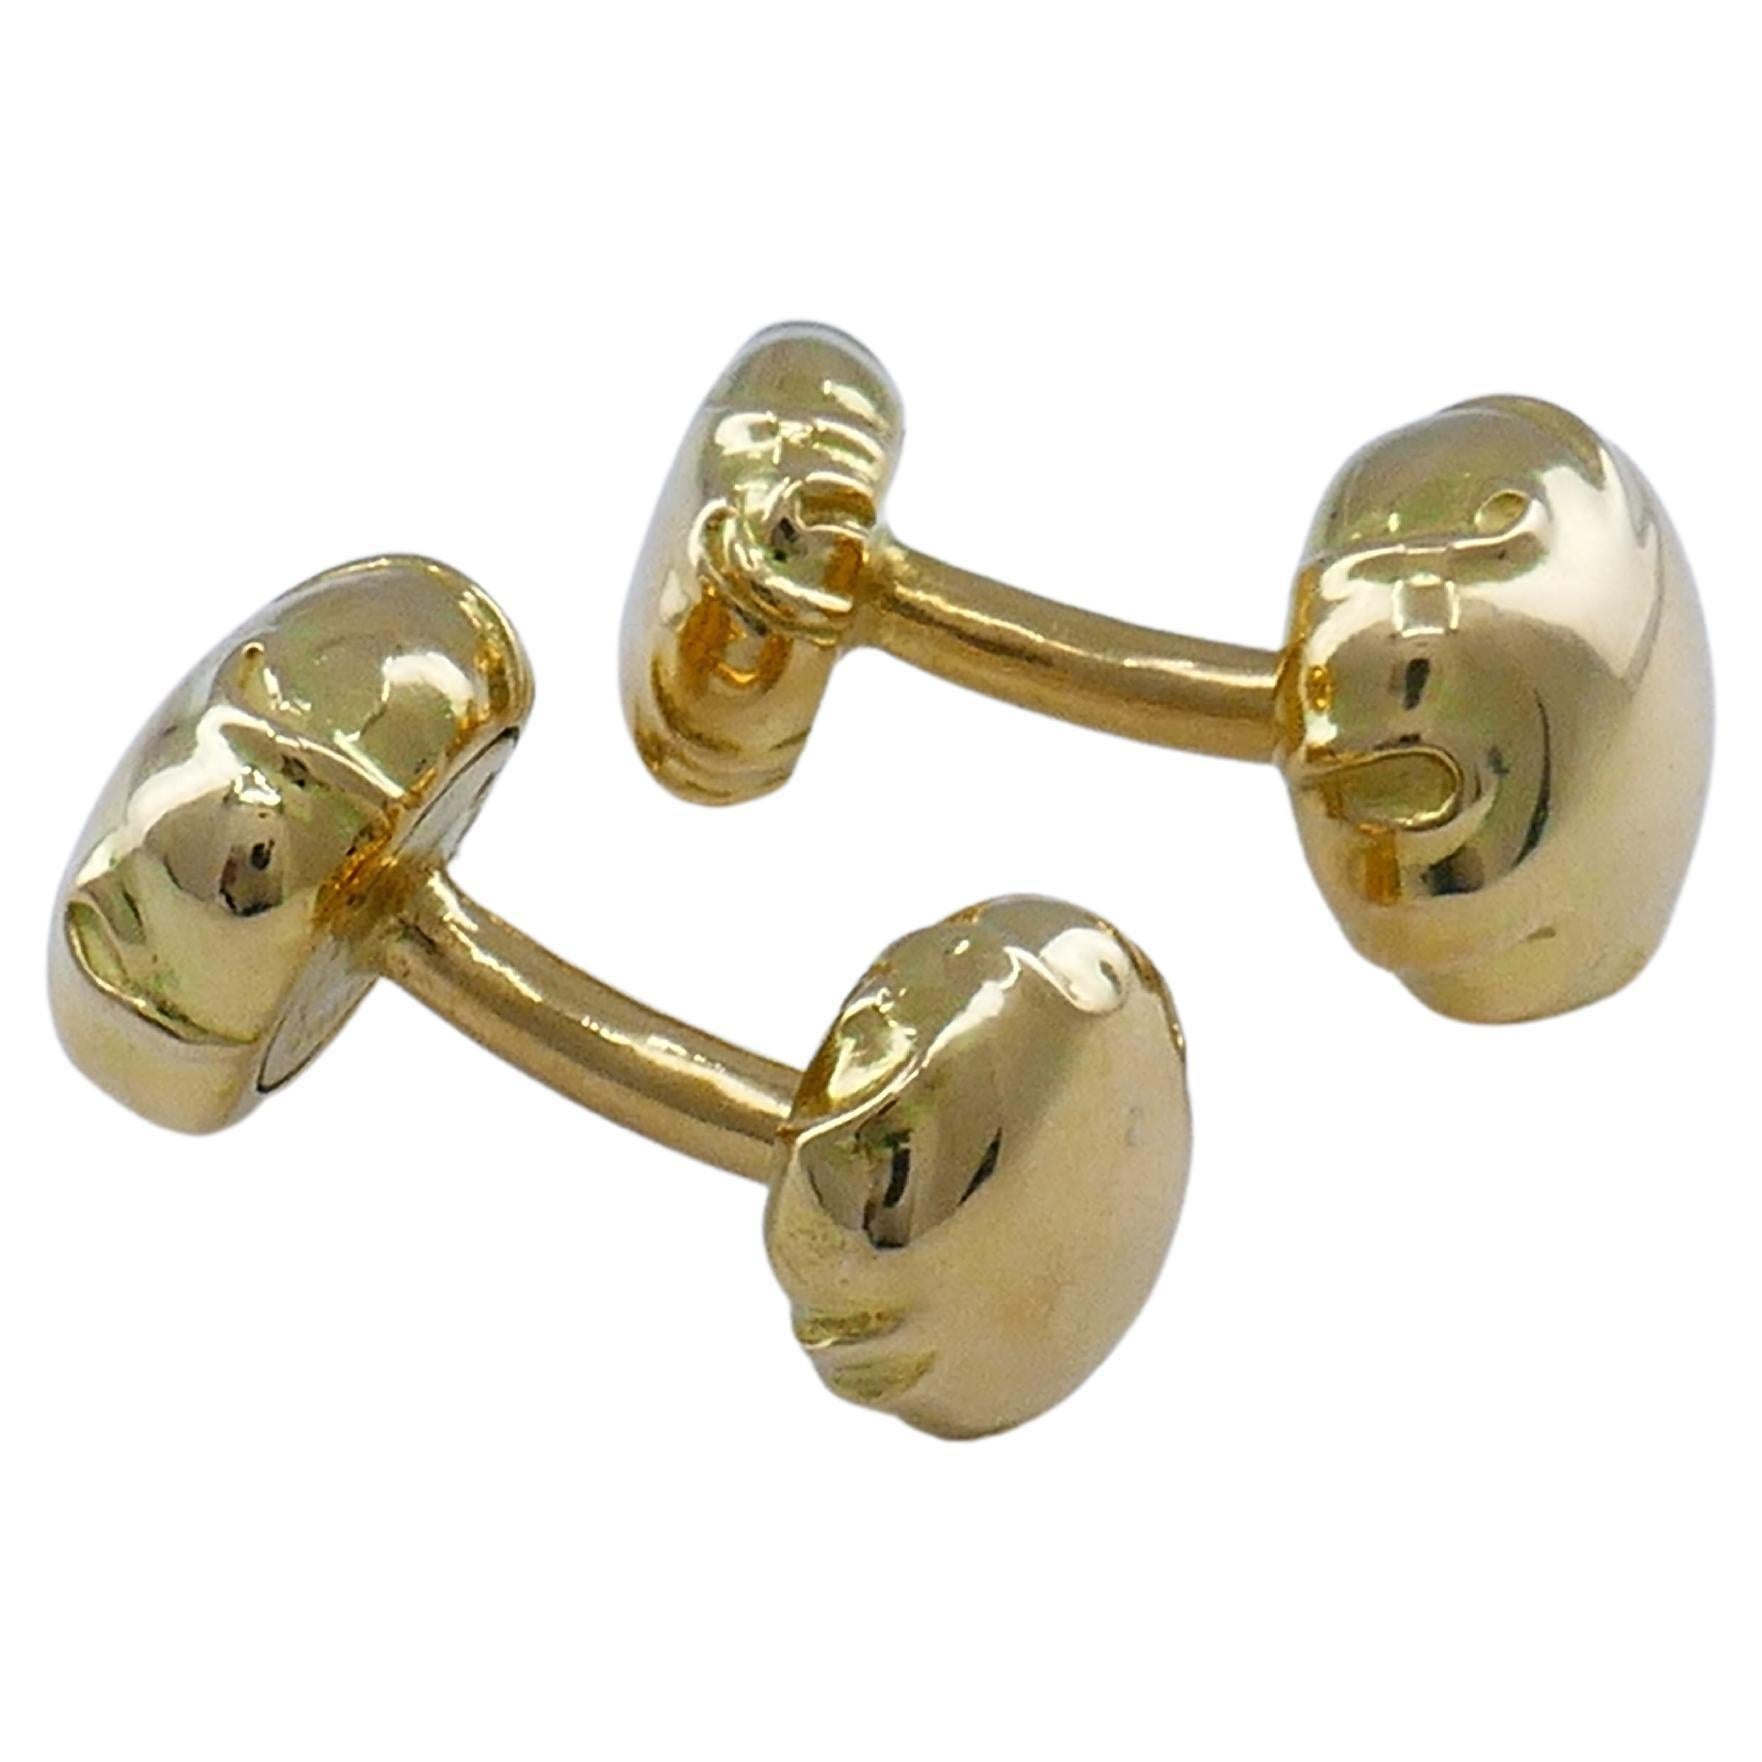 A pair of 18k gold cufflinks by Angela Cummings, designed as classic button cufflinks with Cummings' signature organic approach. 
The tops looks like buttons covered with fabric. The gold perfectly imitates fabric folds. 
These Angela Cummings